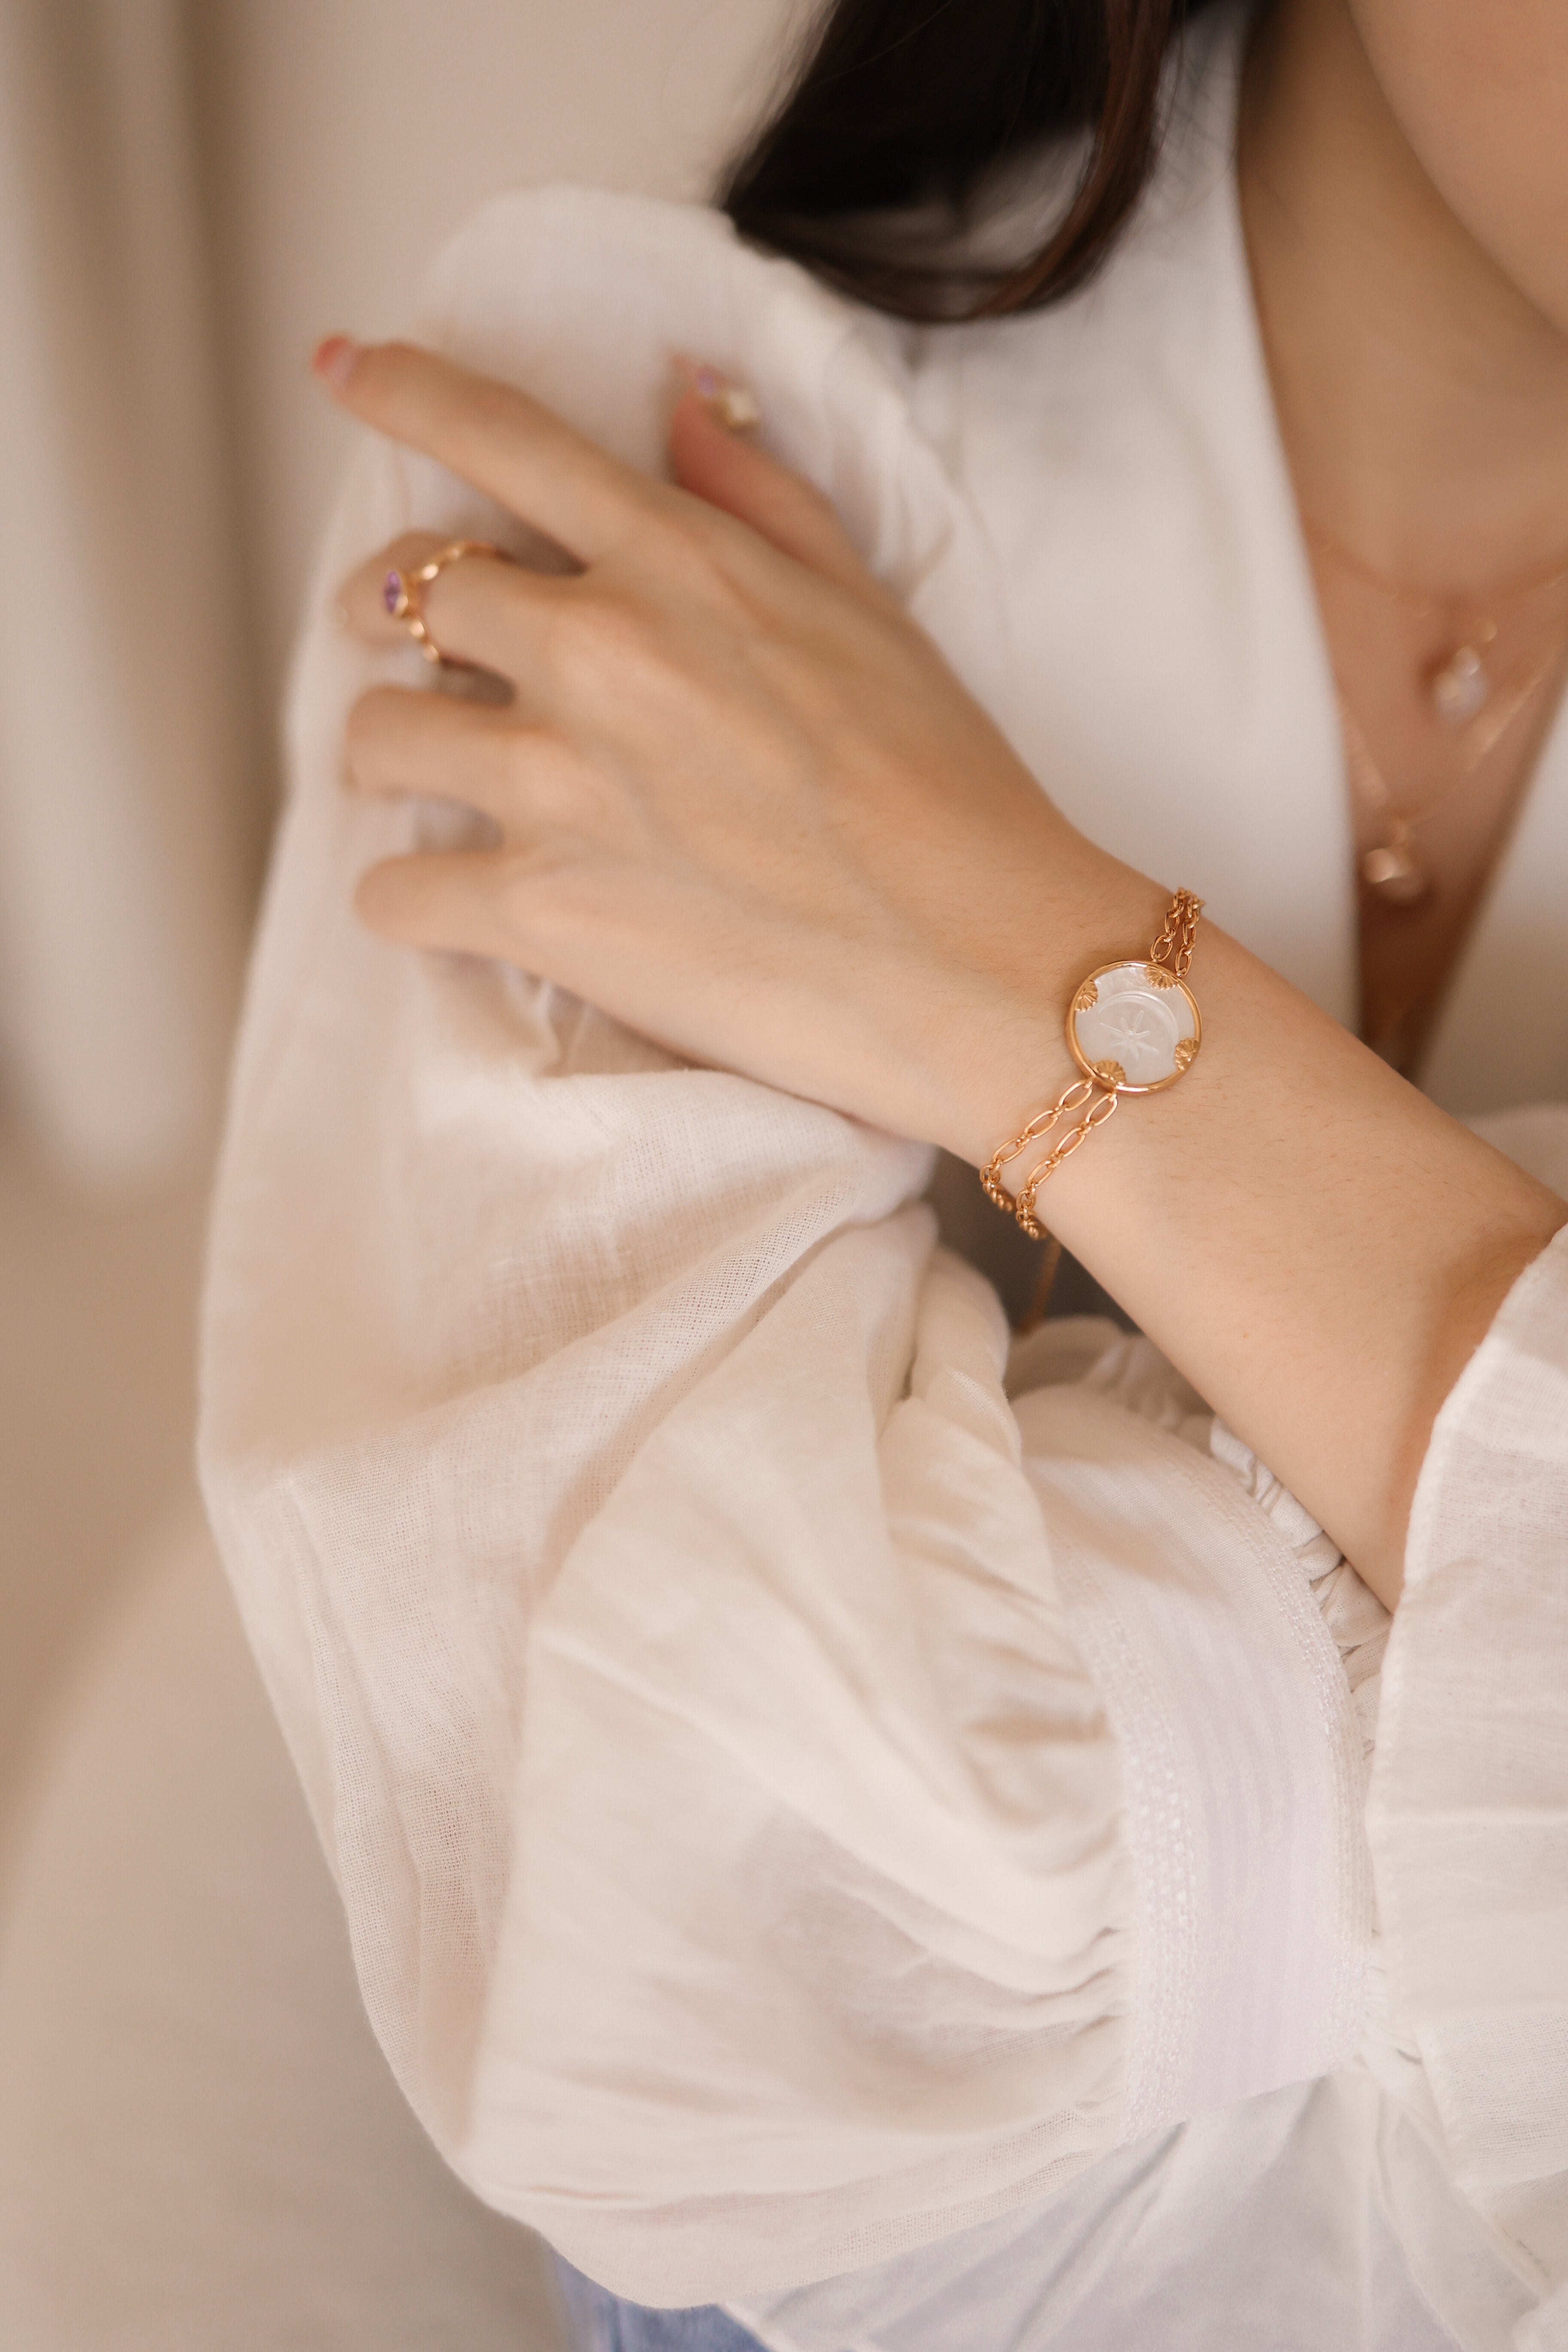 Mother of Pearl Gold Disc Bracelet - Moon Garden | LOVE BY THE MOON